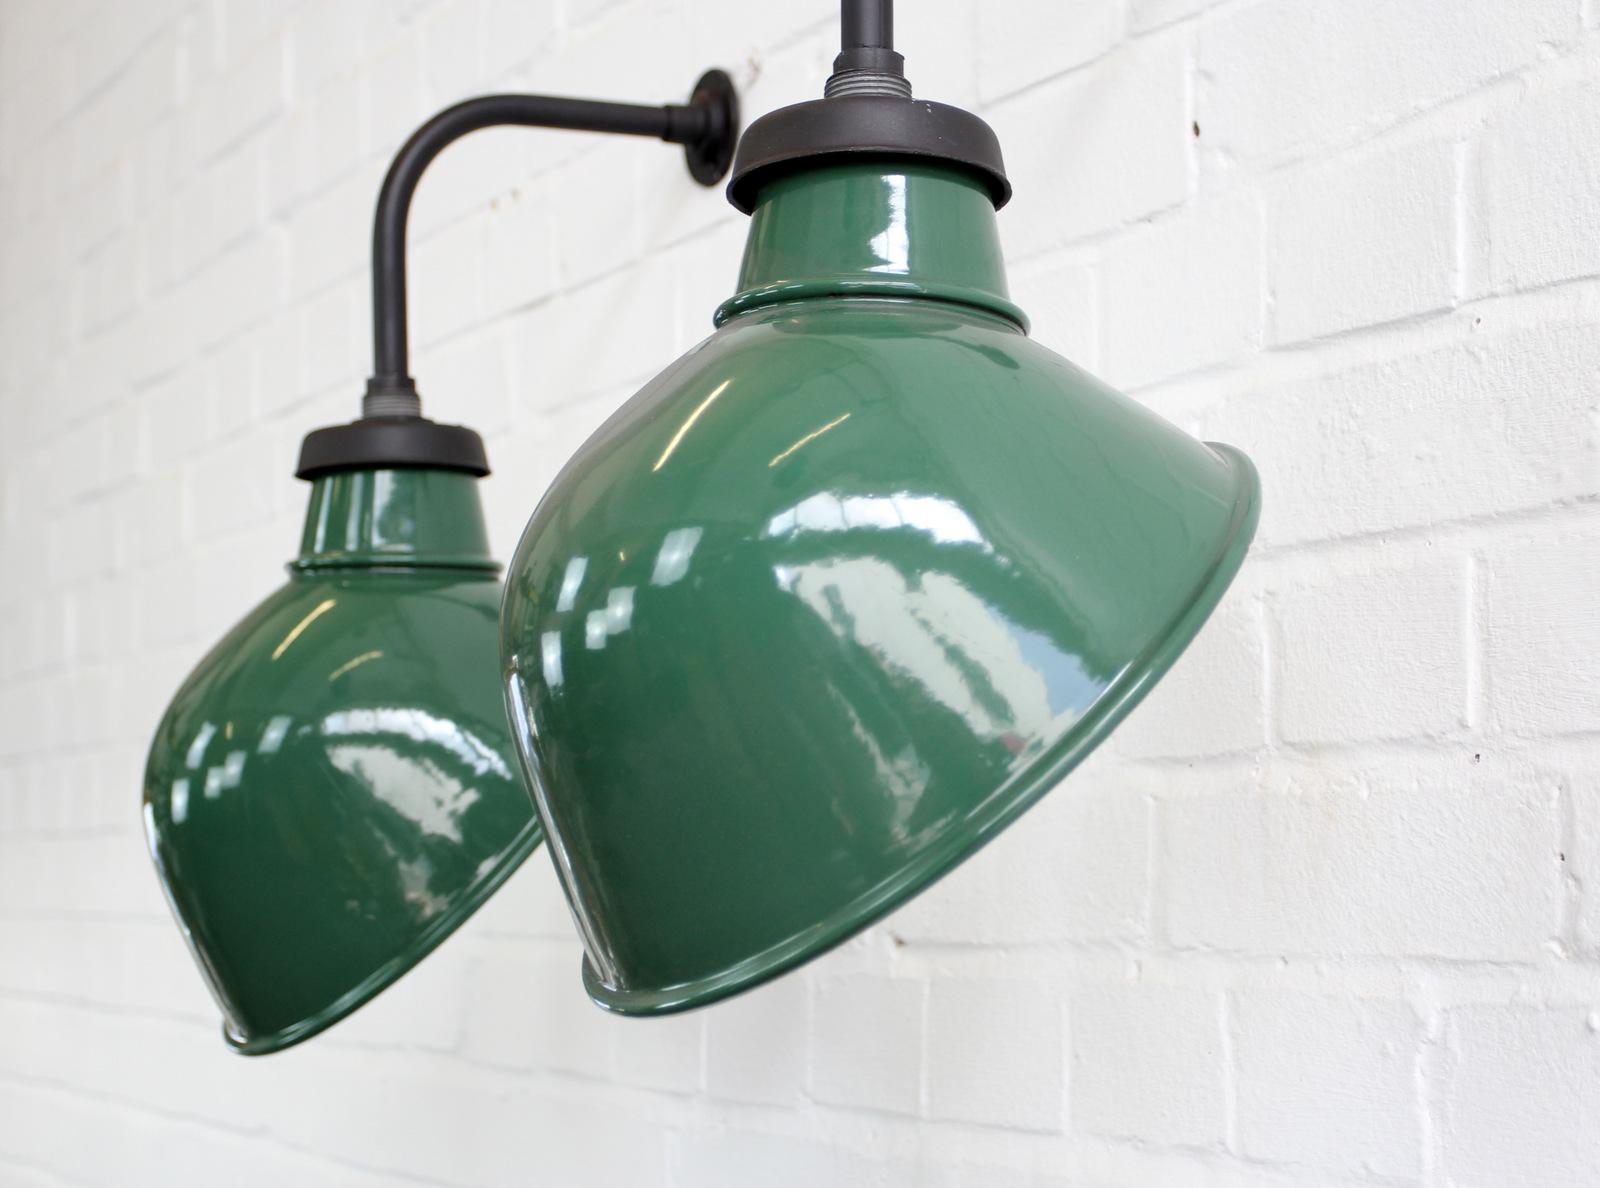 Wall-mounted industrial lamps by Crossland, circa 1950s

- Price is per light (16 available)
- Vitreous green enamel shades
- White enamel inner reflector
- Takes E27 fitting bulbs
- The lights wire directly into a wall feed
- English, Circa